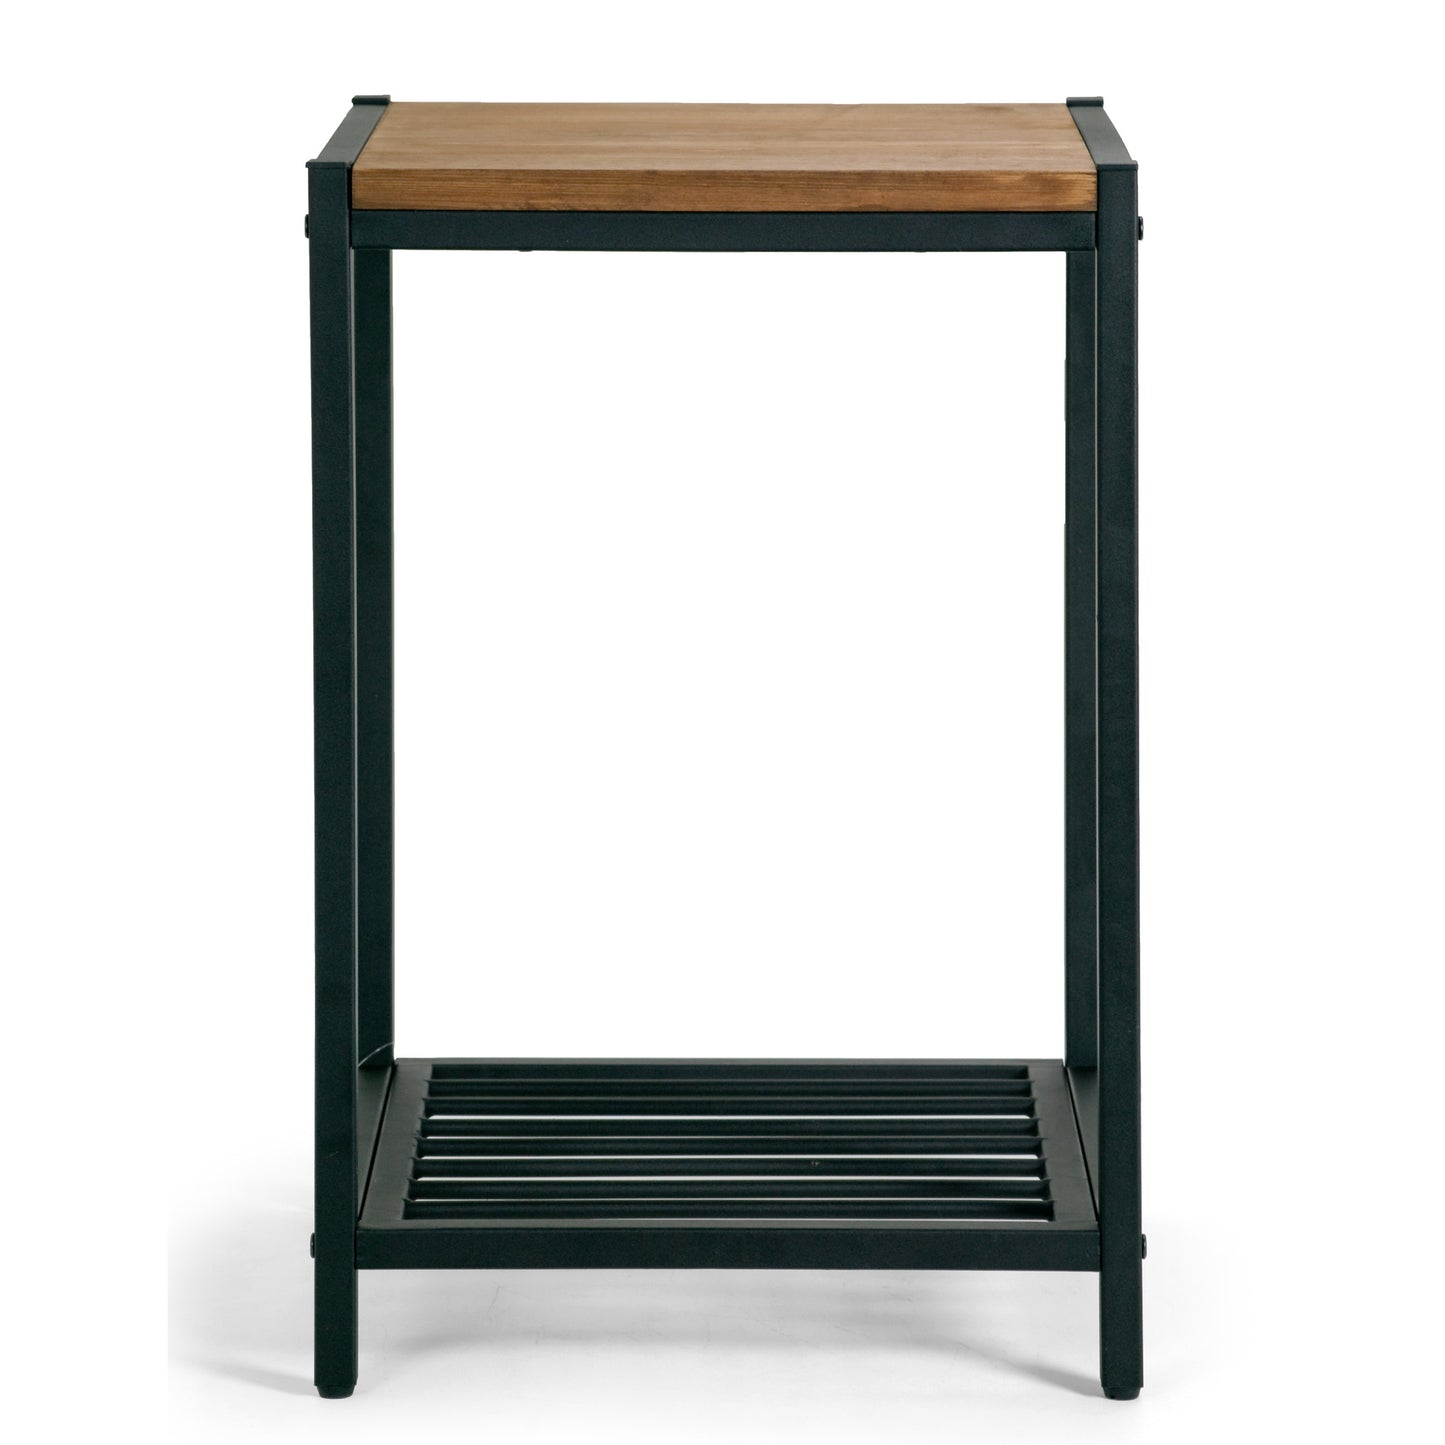 Ailis Brown Pine Wood Black Metal Frame End Table Accent Table